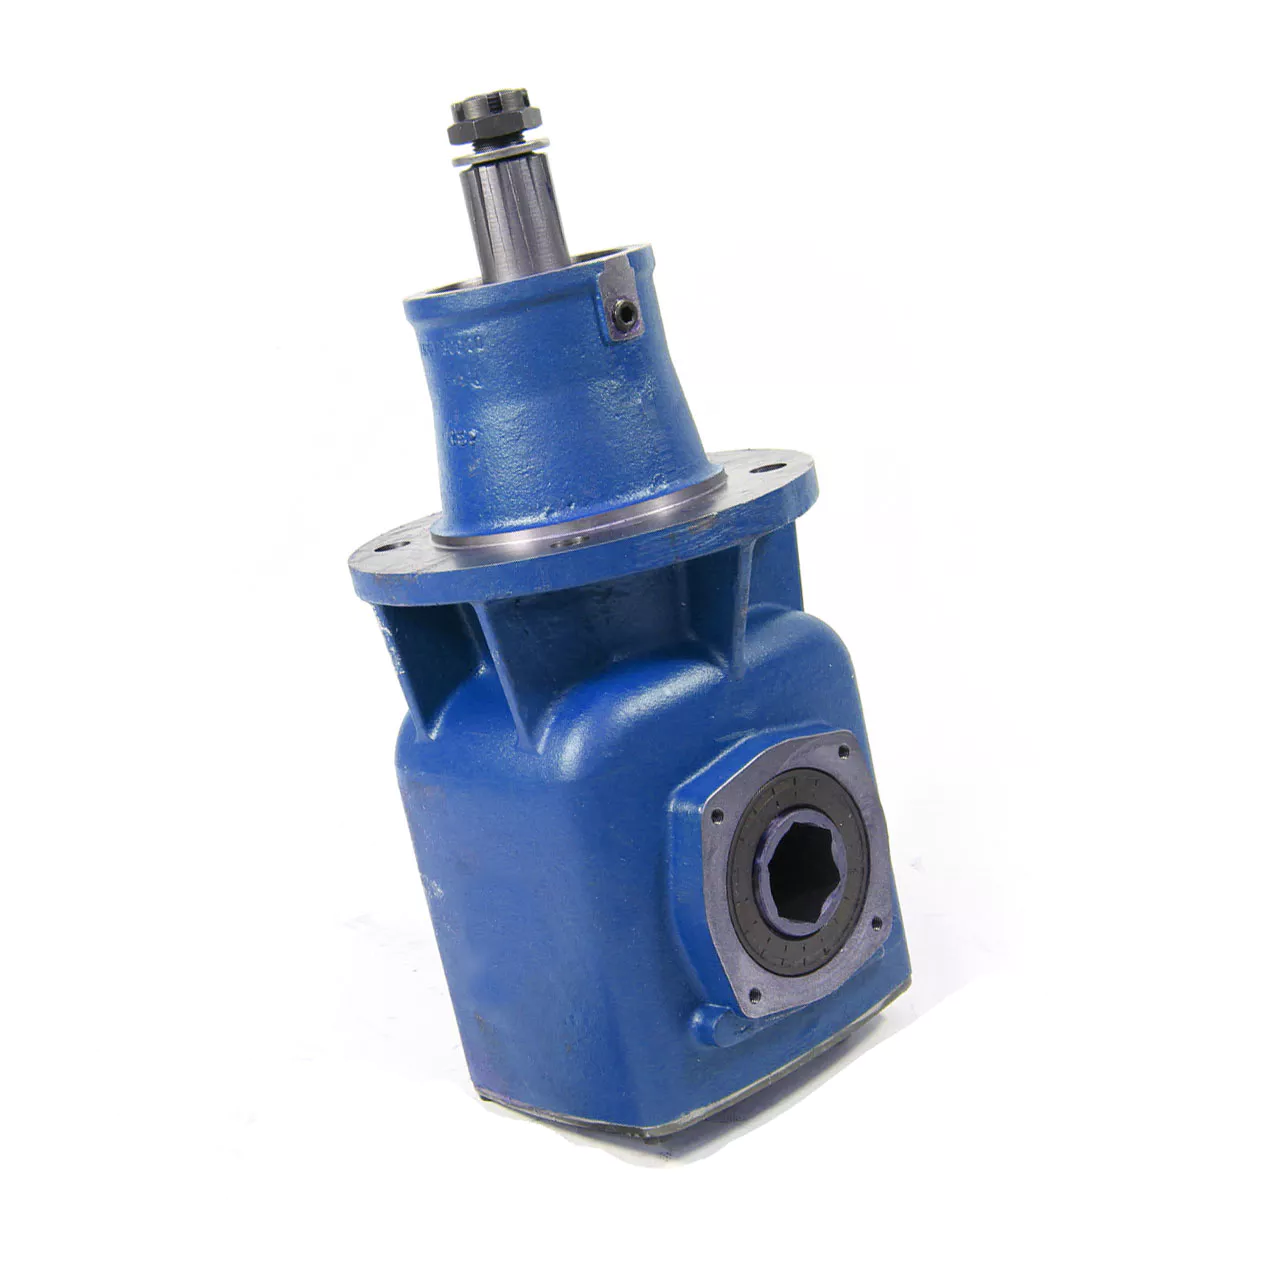 Rotary Mowers Gearboxes - Replacement of Comer Code LF-199A Rotary Mowers Gearboxes Replacement of Comer Code LF 199A